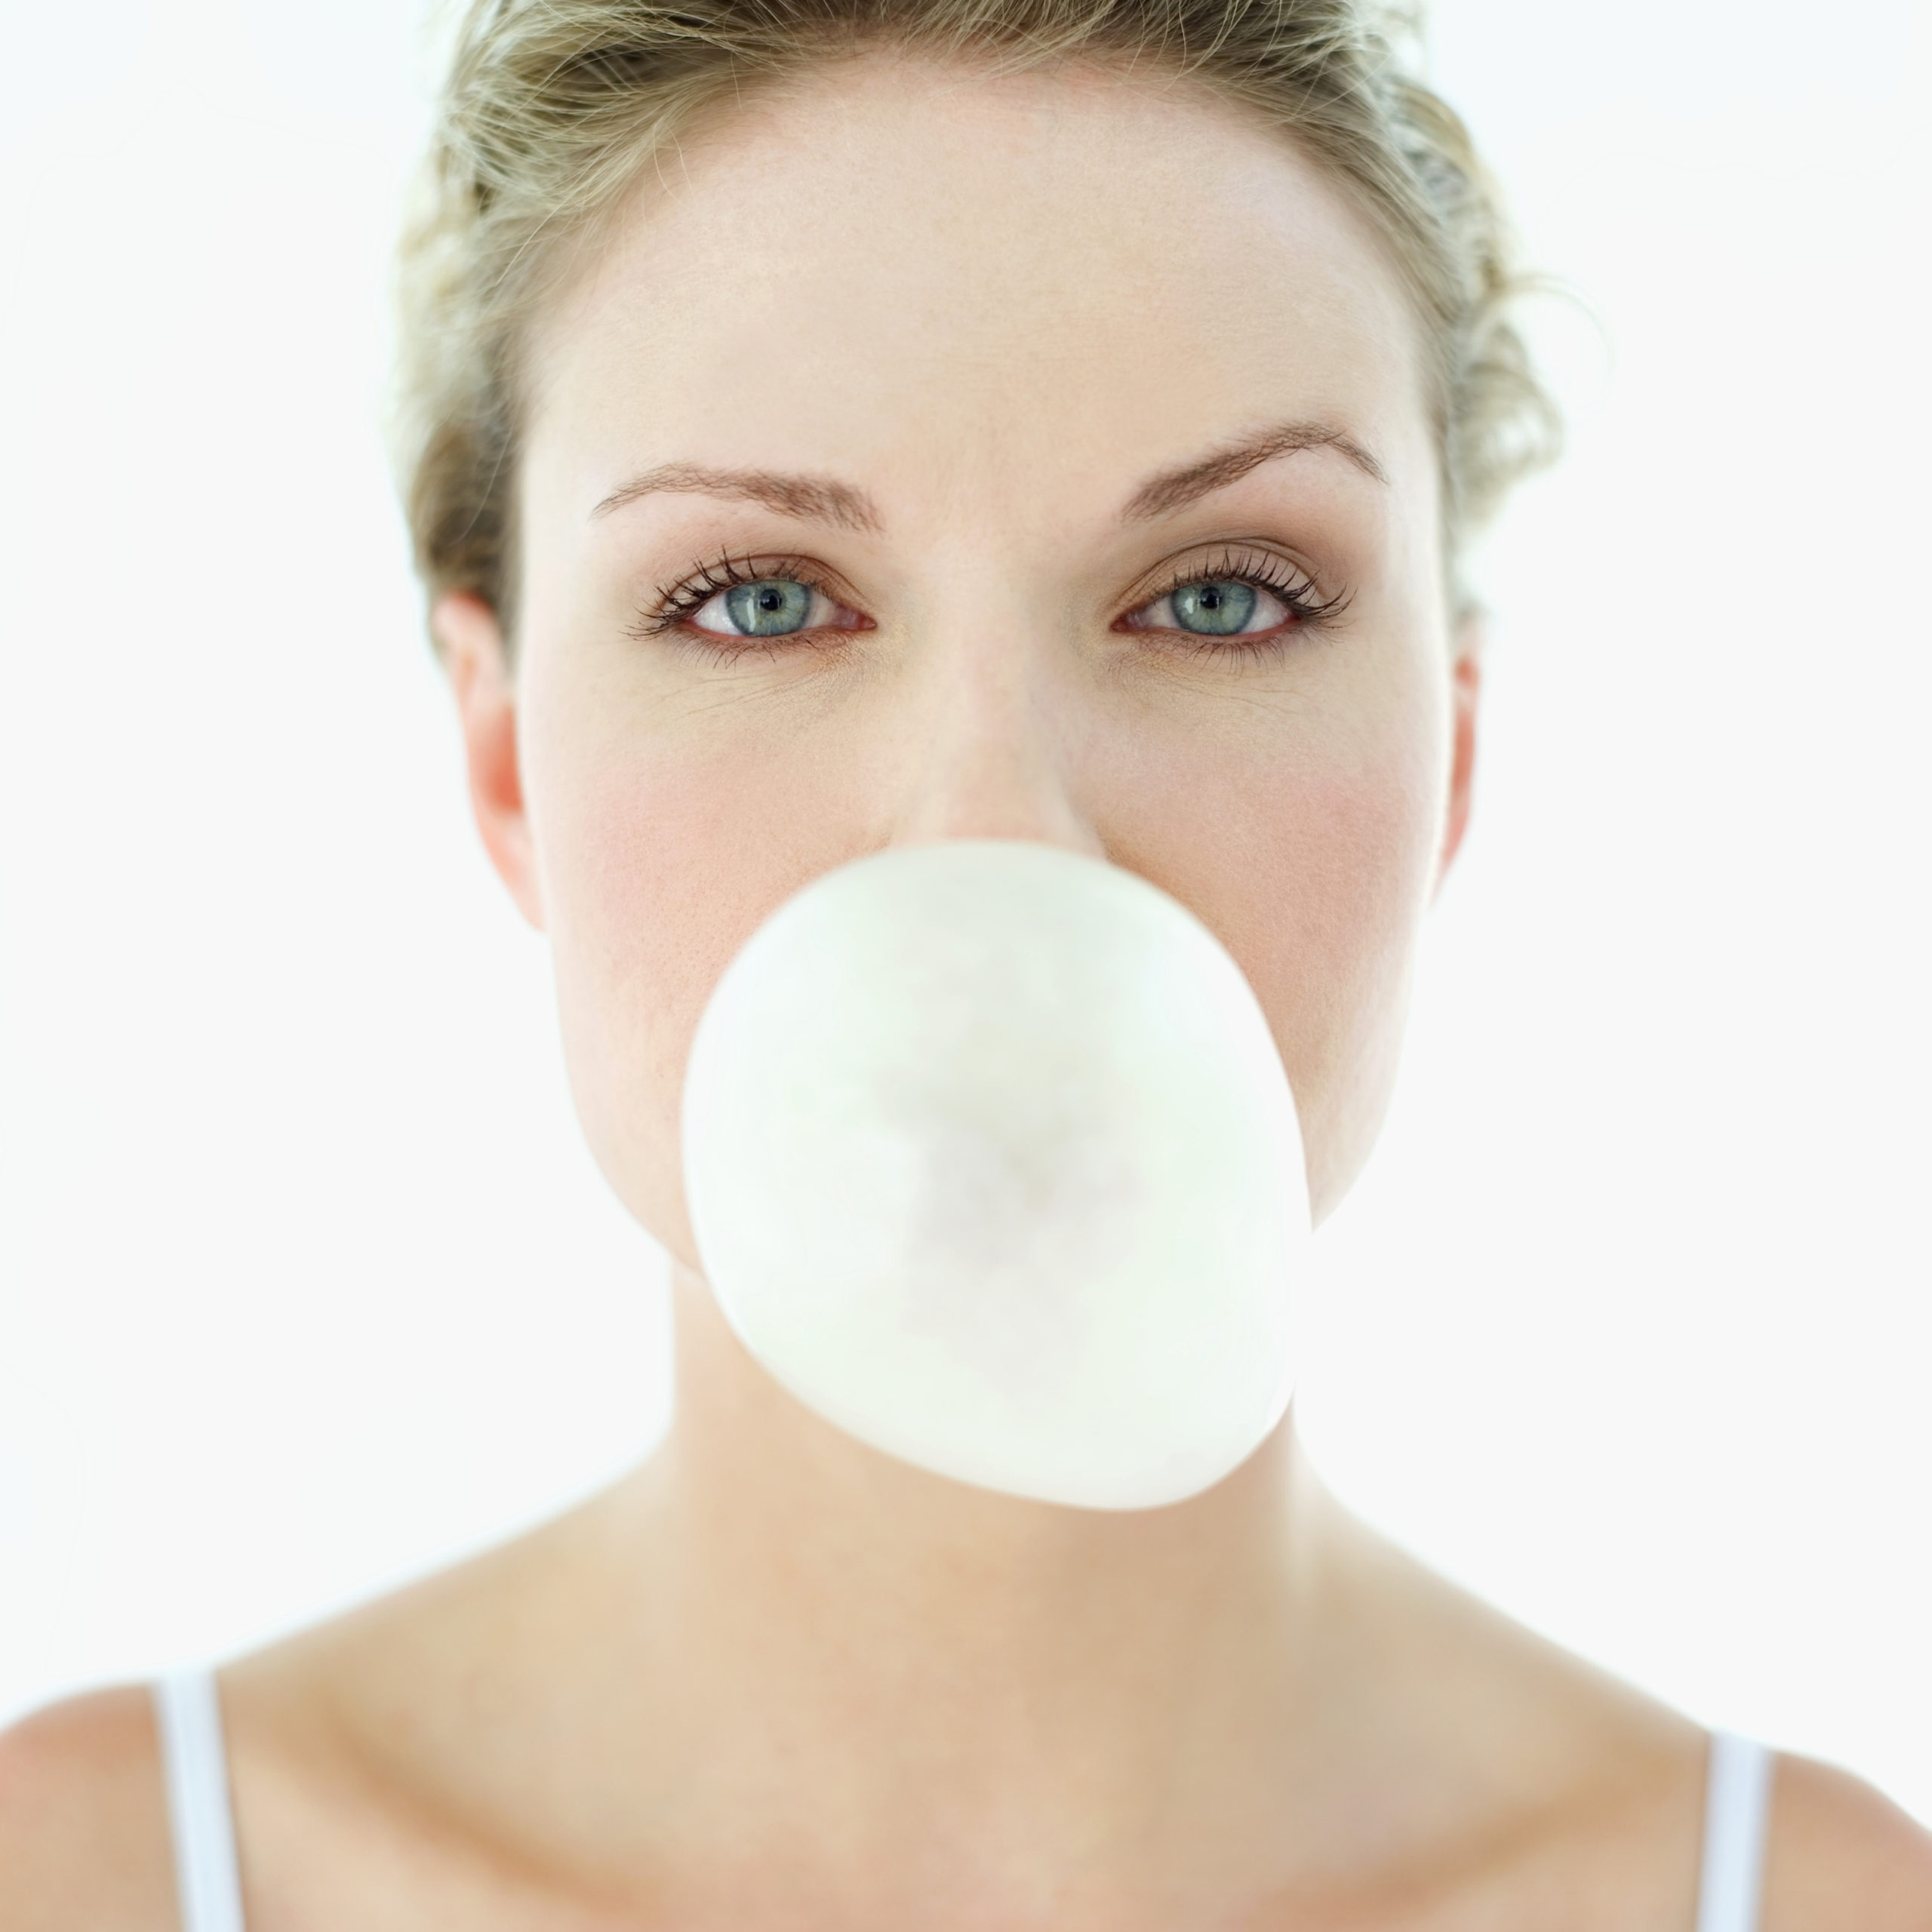 Is Sugar Free Gum Good For Your Teeth?